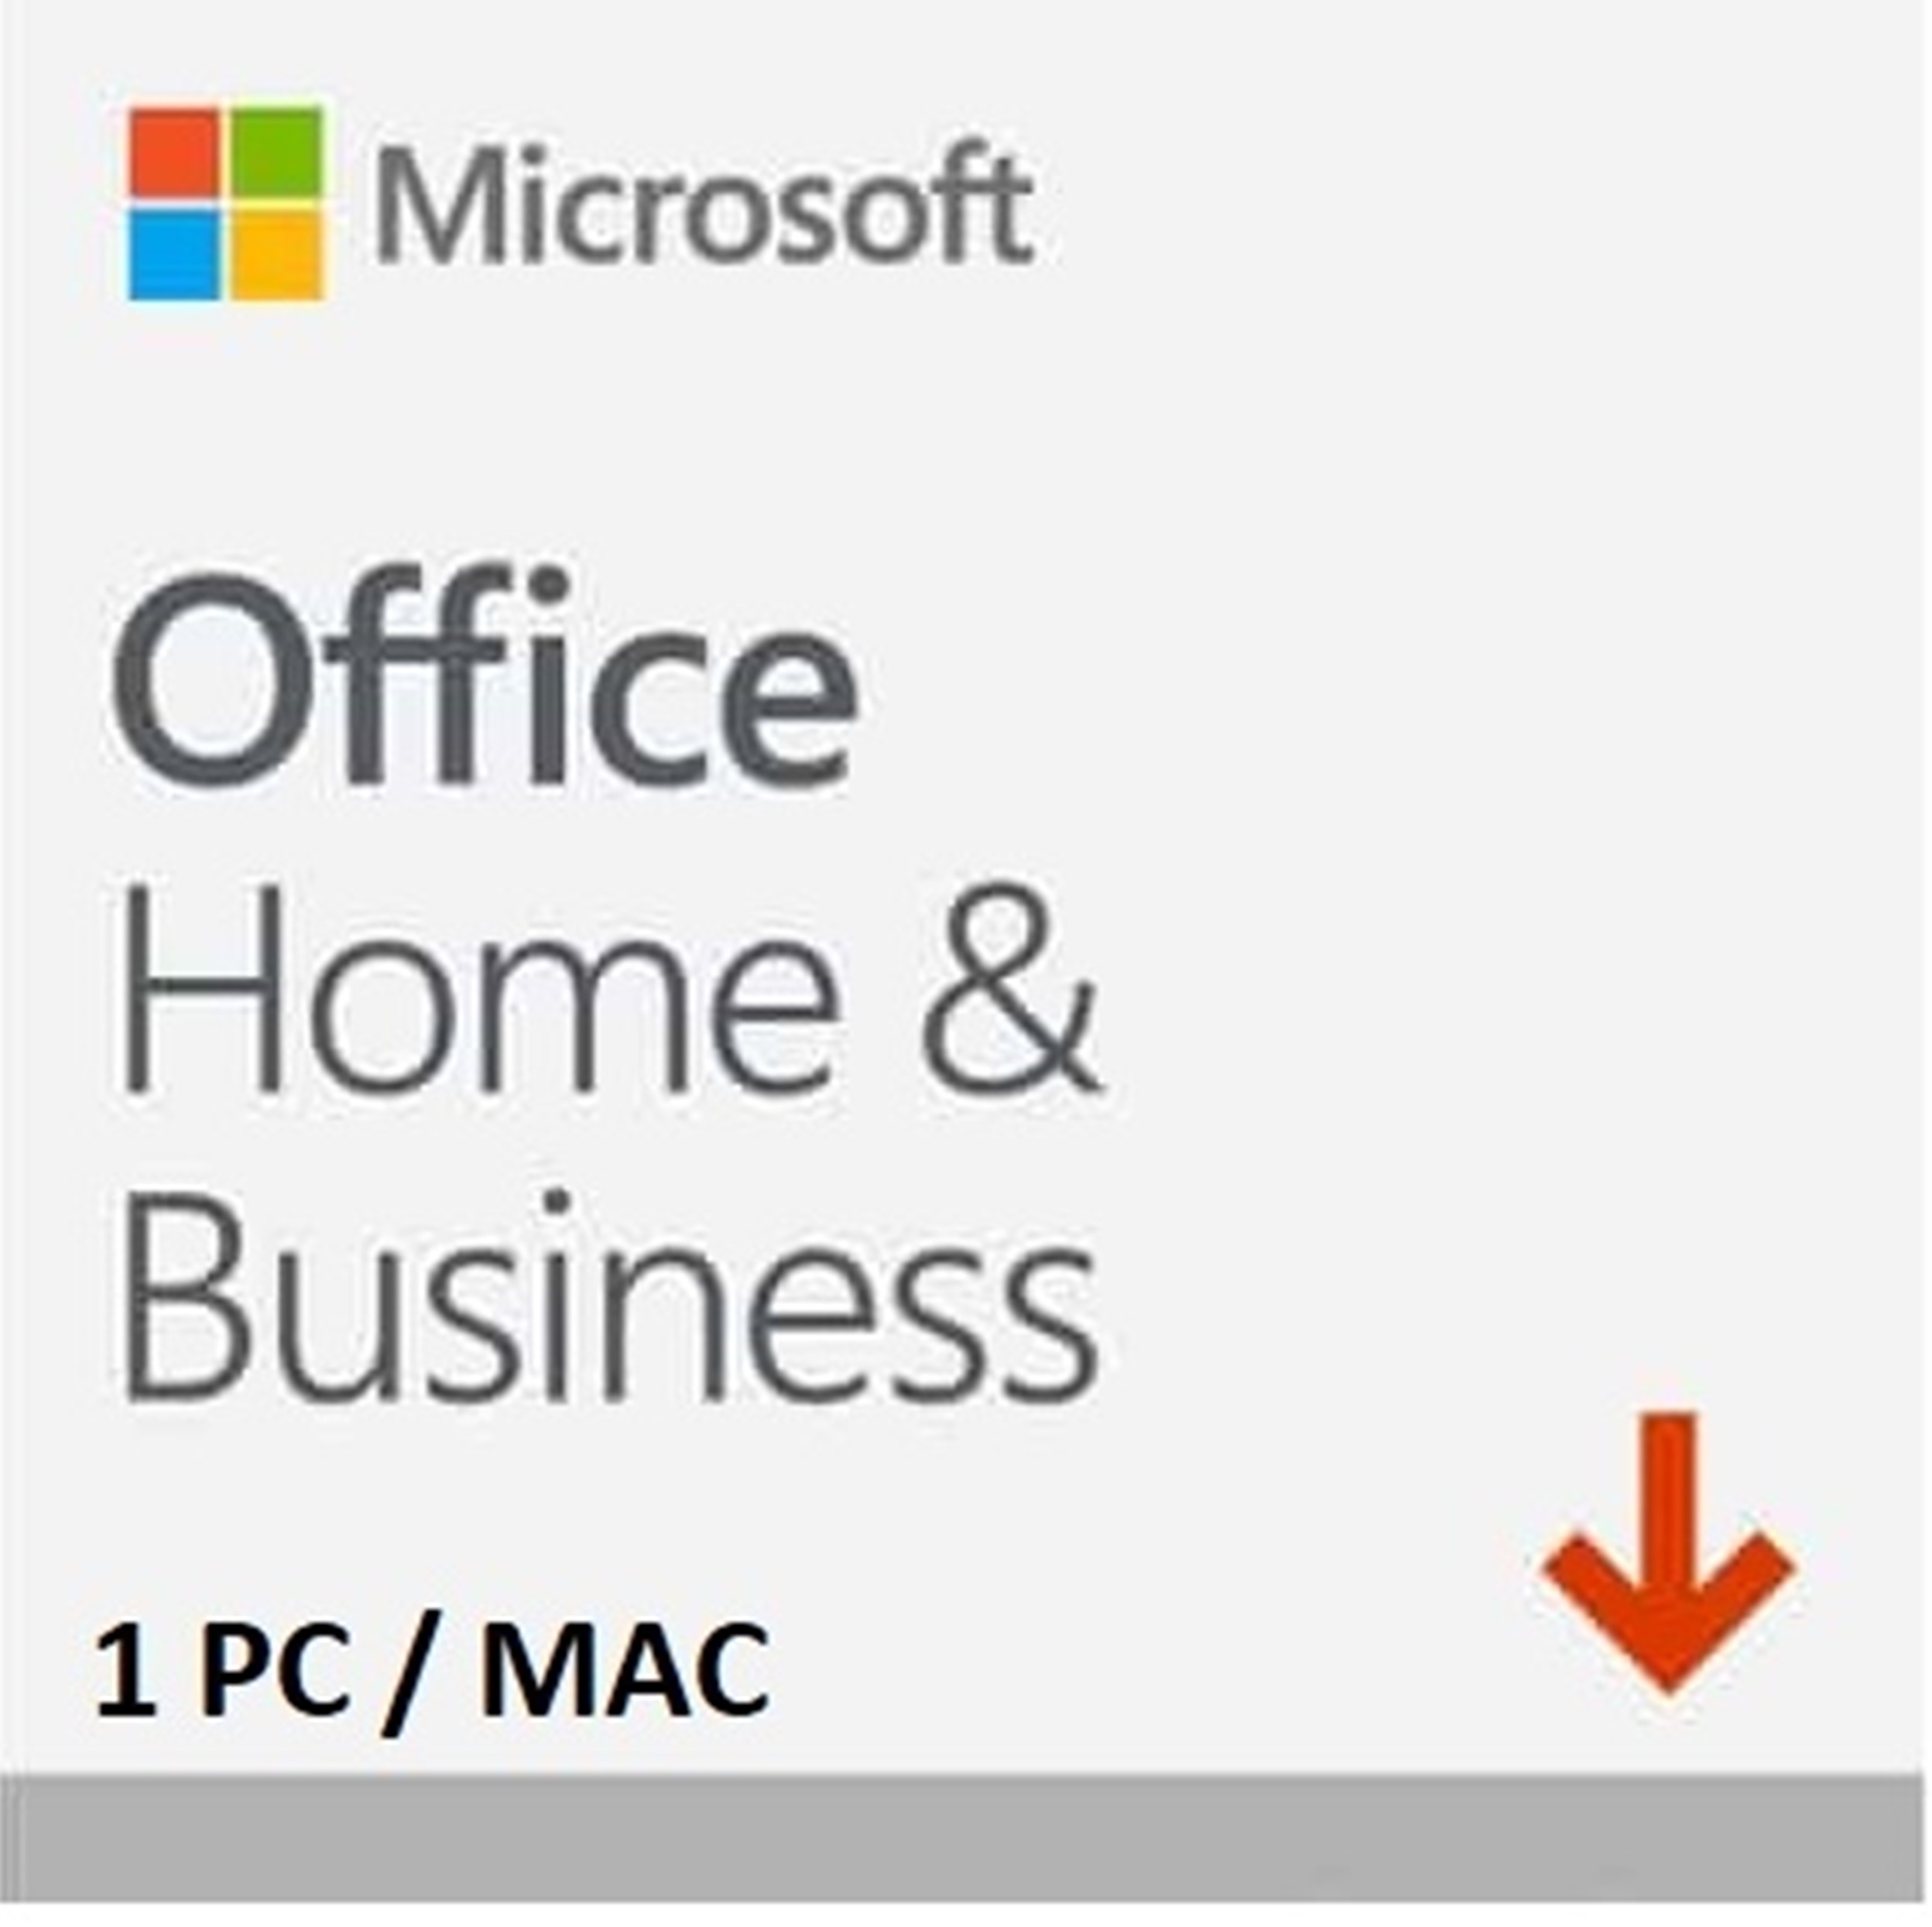 Office 2019 Home and Business for 1 PC/MAC Bind Key